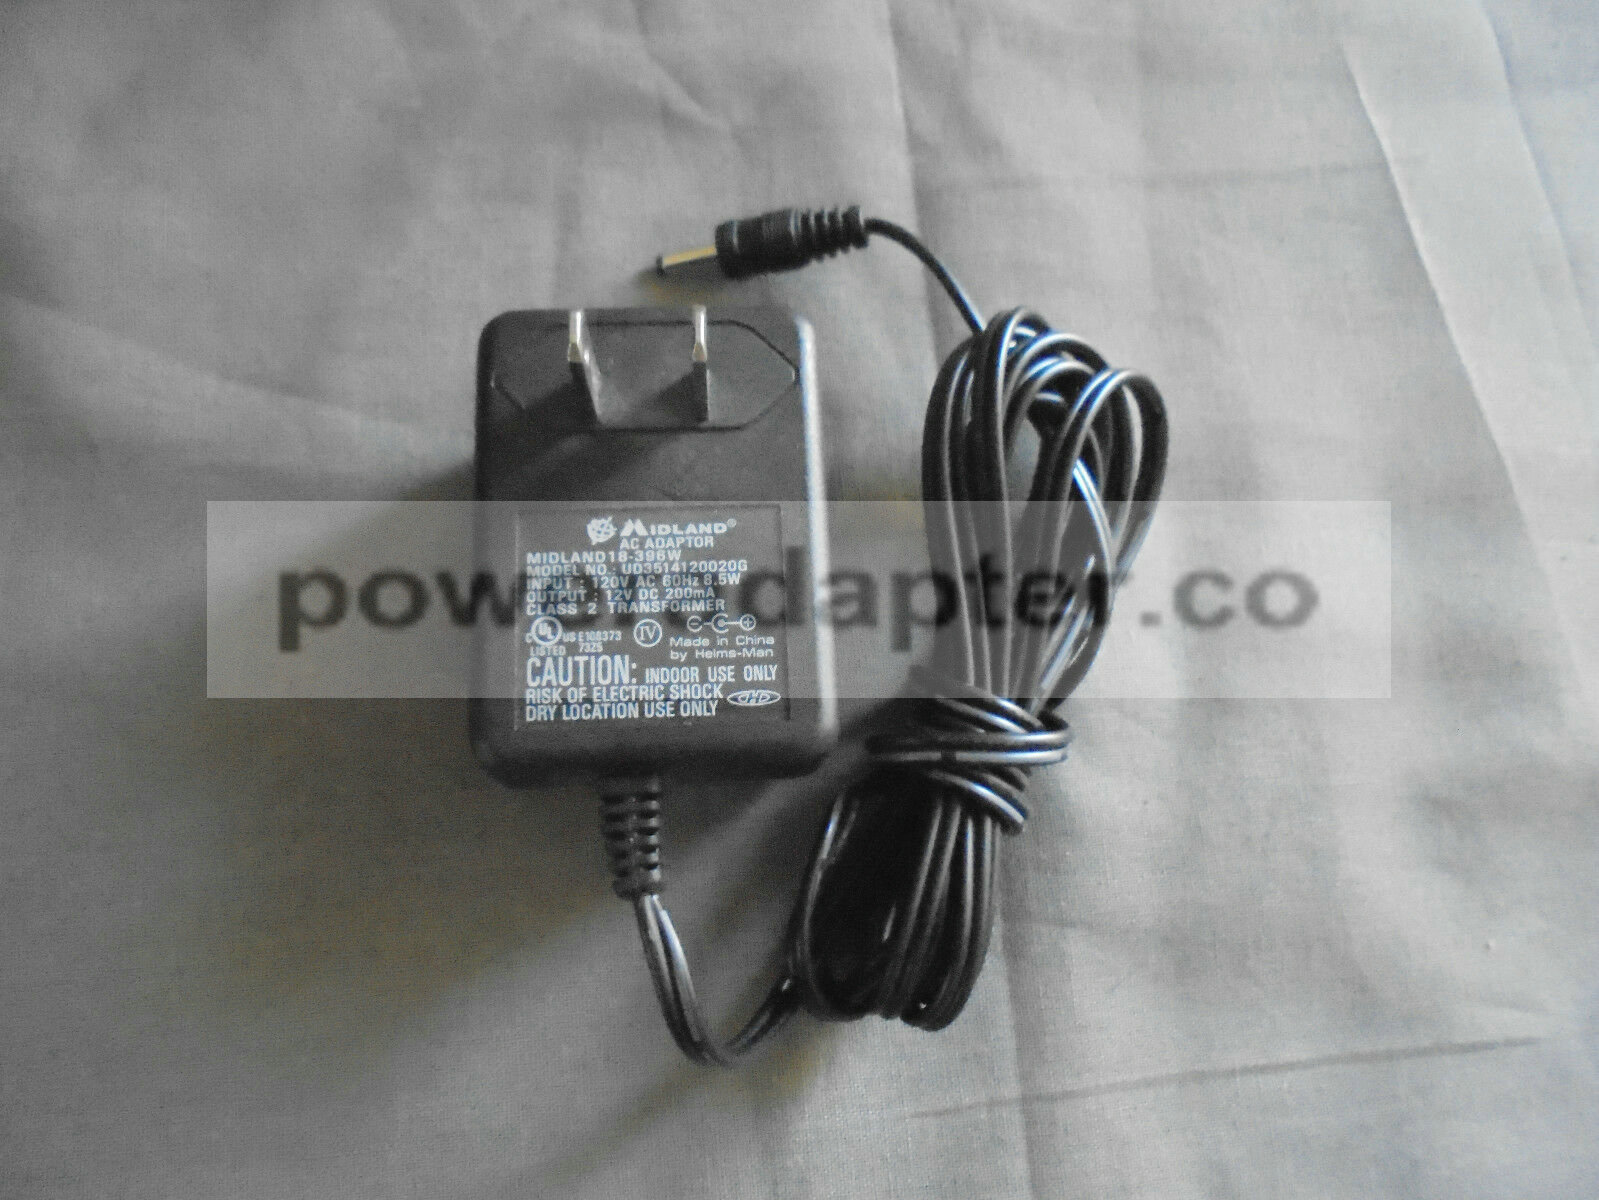 Midland 18-396W DPX351326 Weather Radio AC Adapter Power Supply UD3514120020G Condition: Used: An item that has been